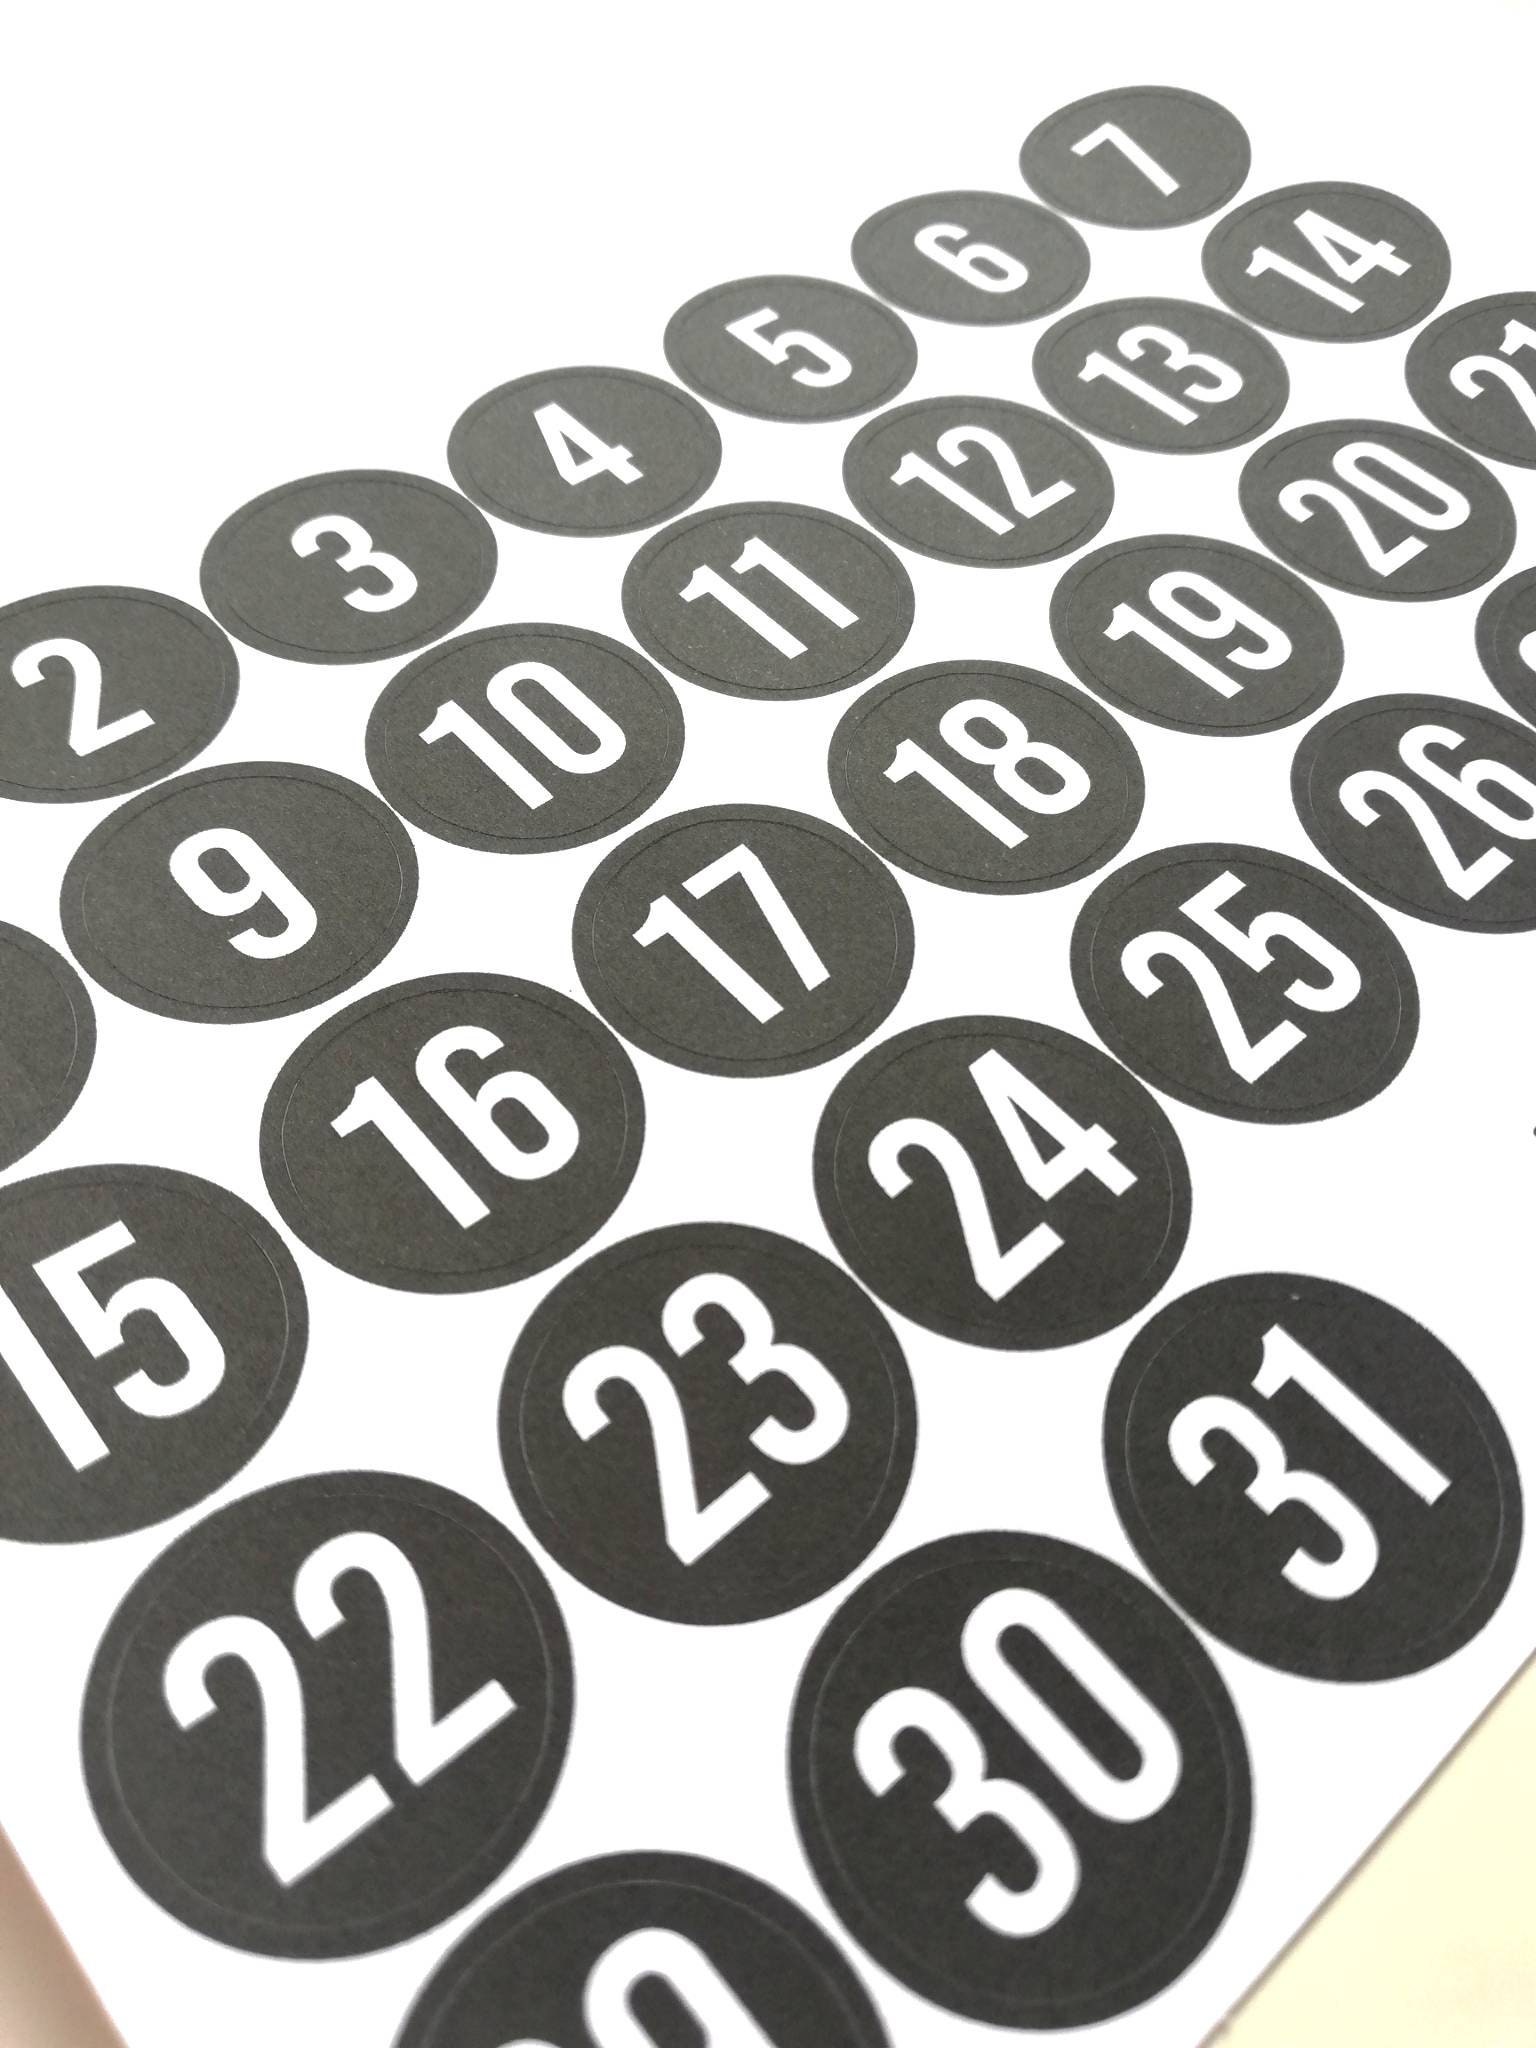 Big number stickers 3 color variations | Etsy